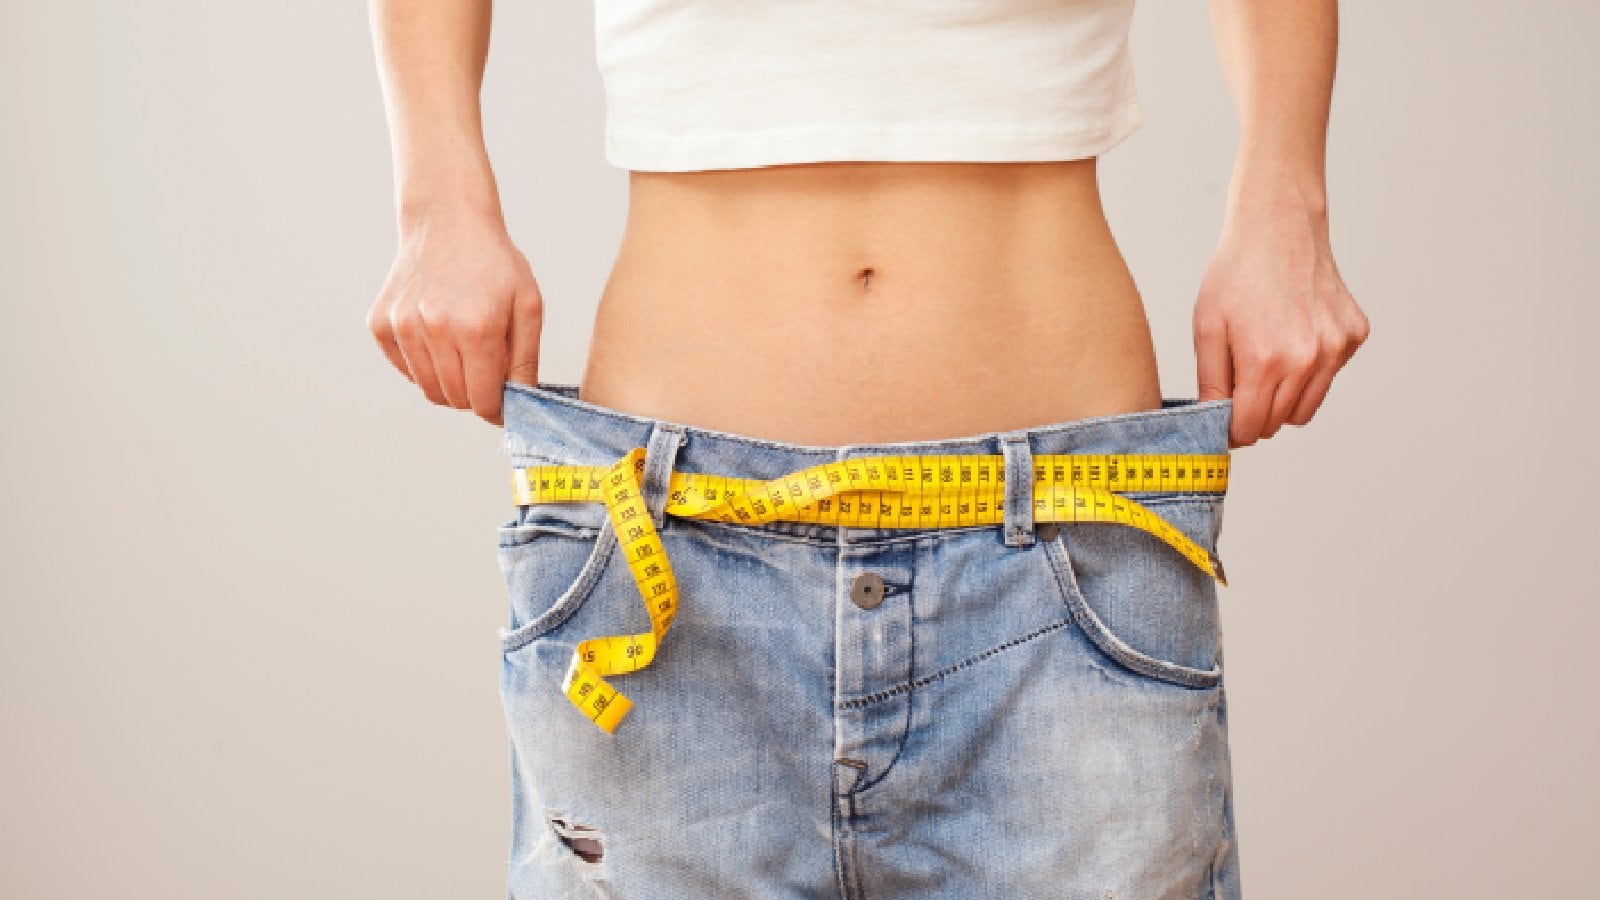 Seeds for weight loss: 5 tiny seeds to help you fight obesity